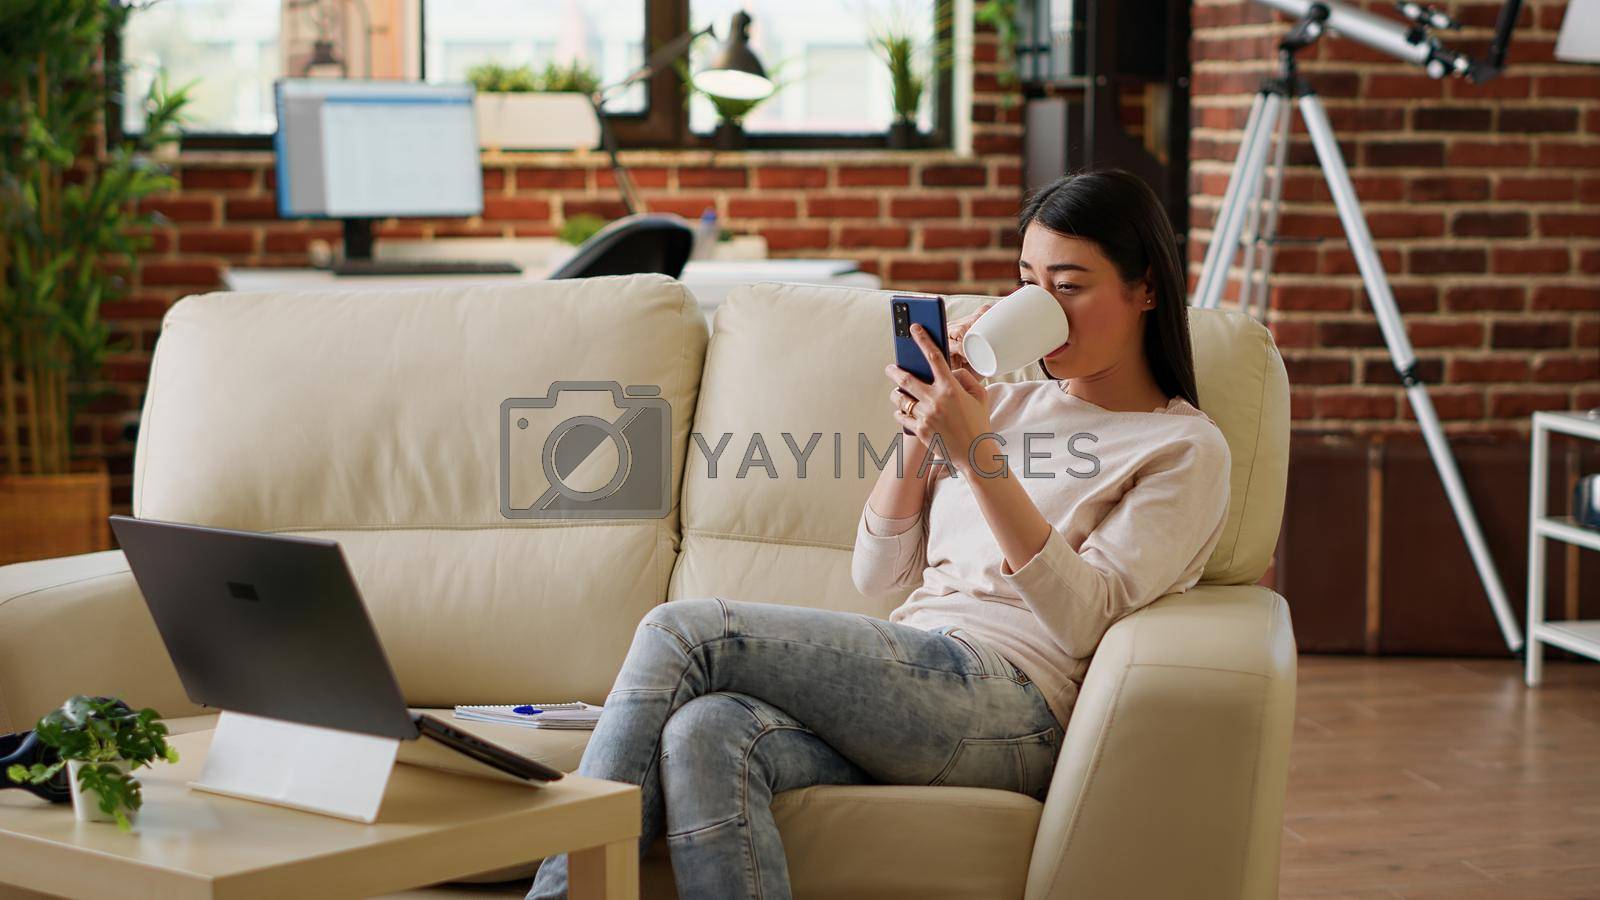 Royalty free image of Happy woman sending messages on mobile phone while doing work from home by DCStudio